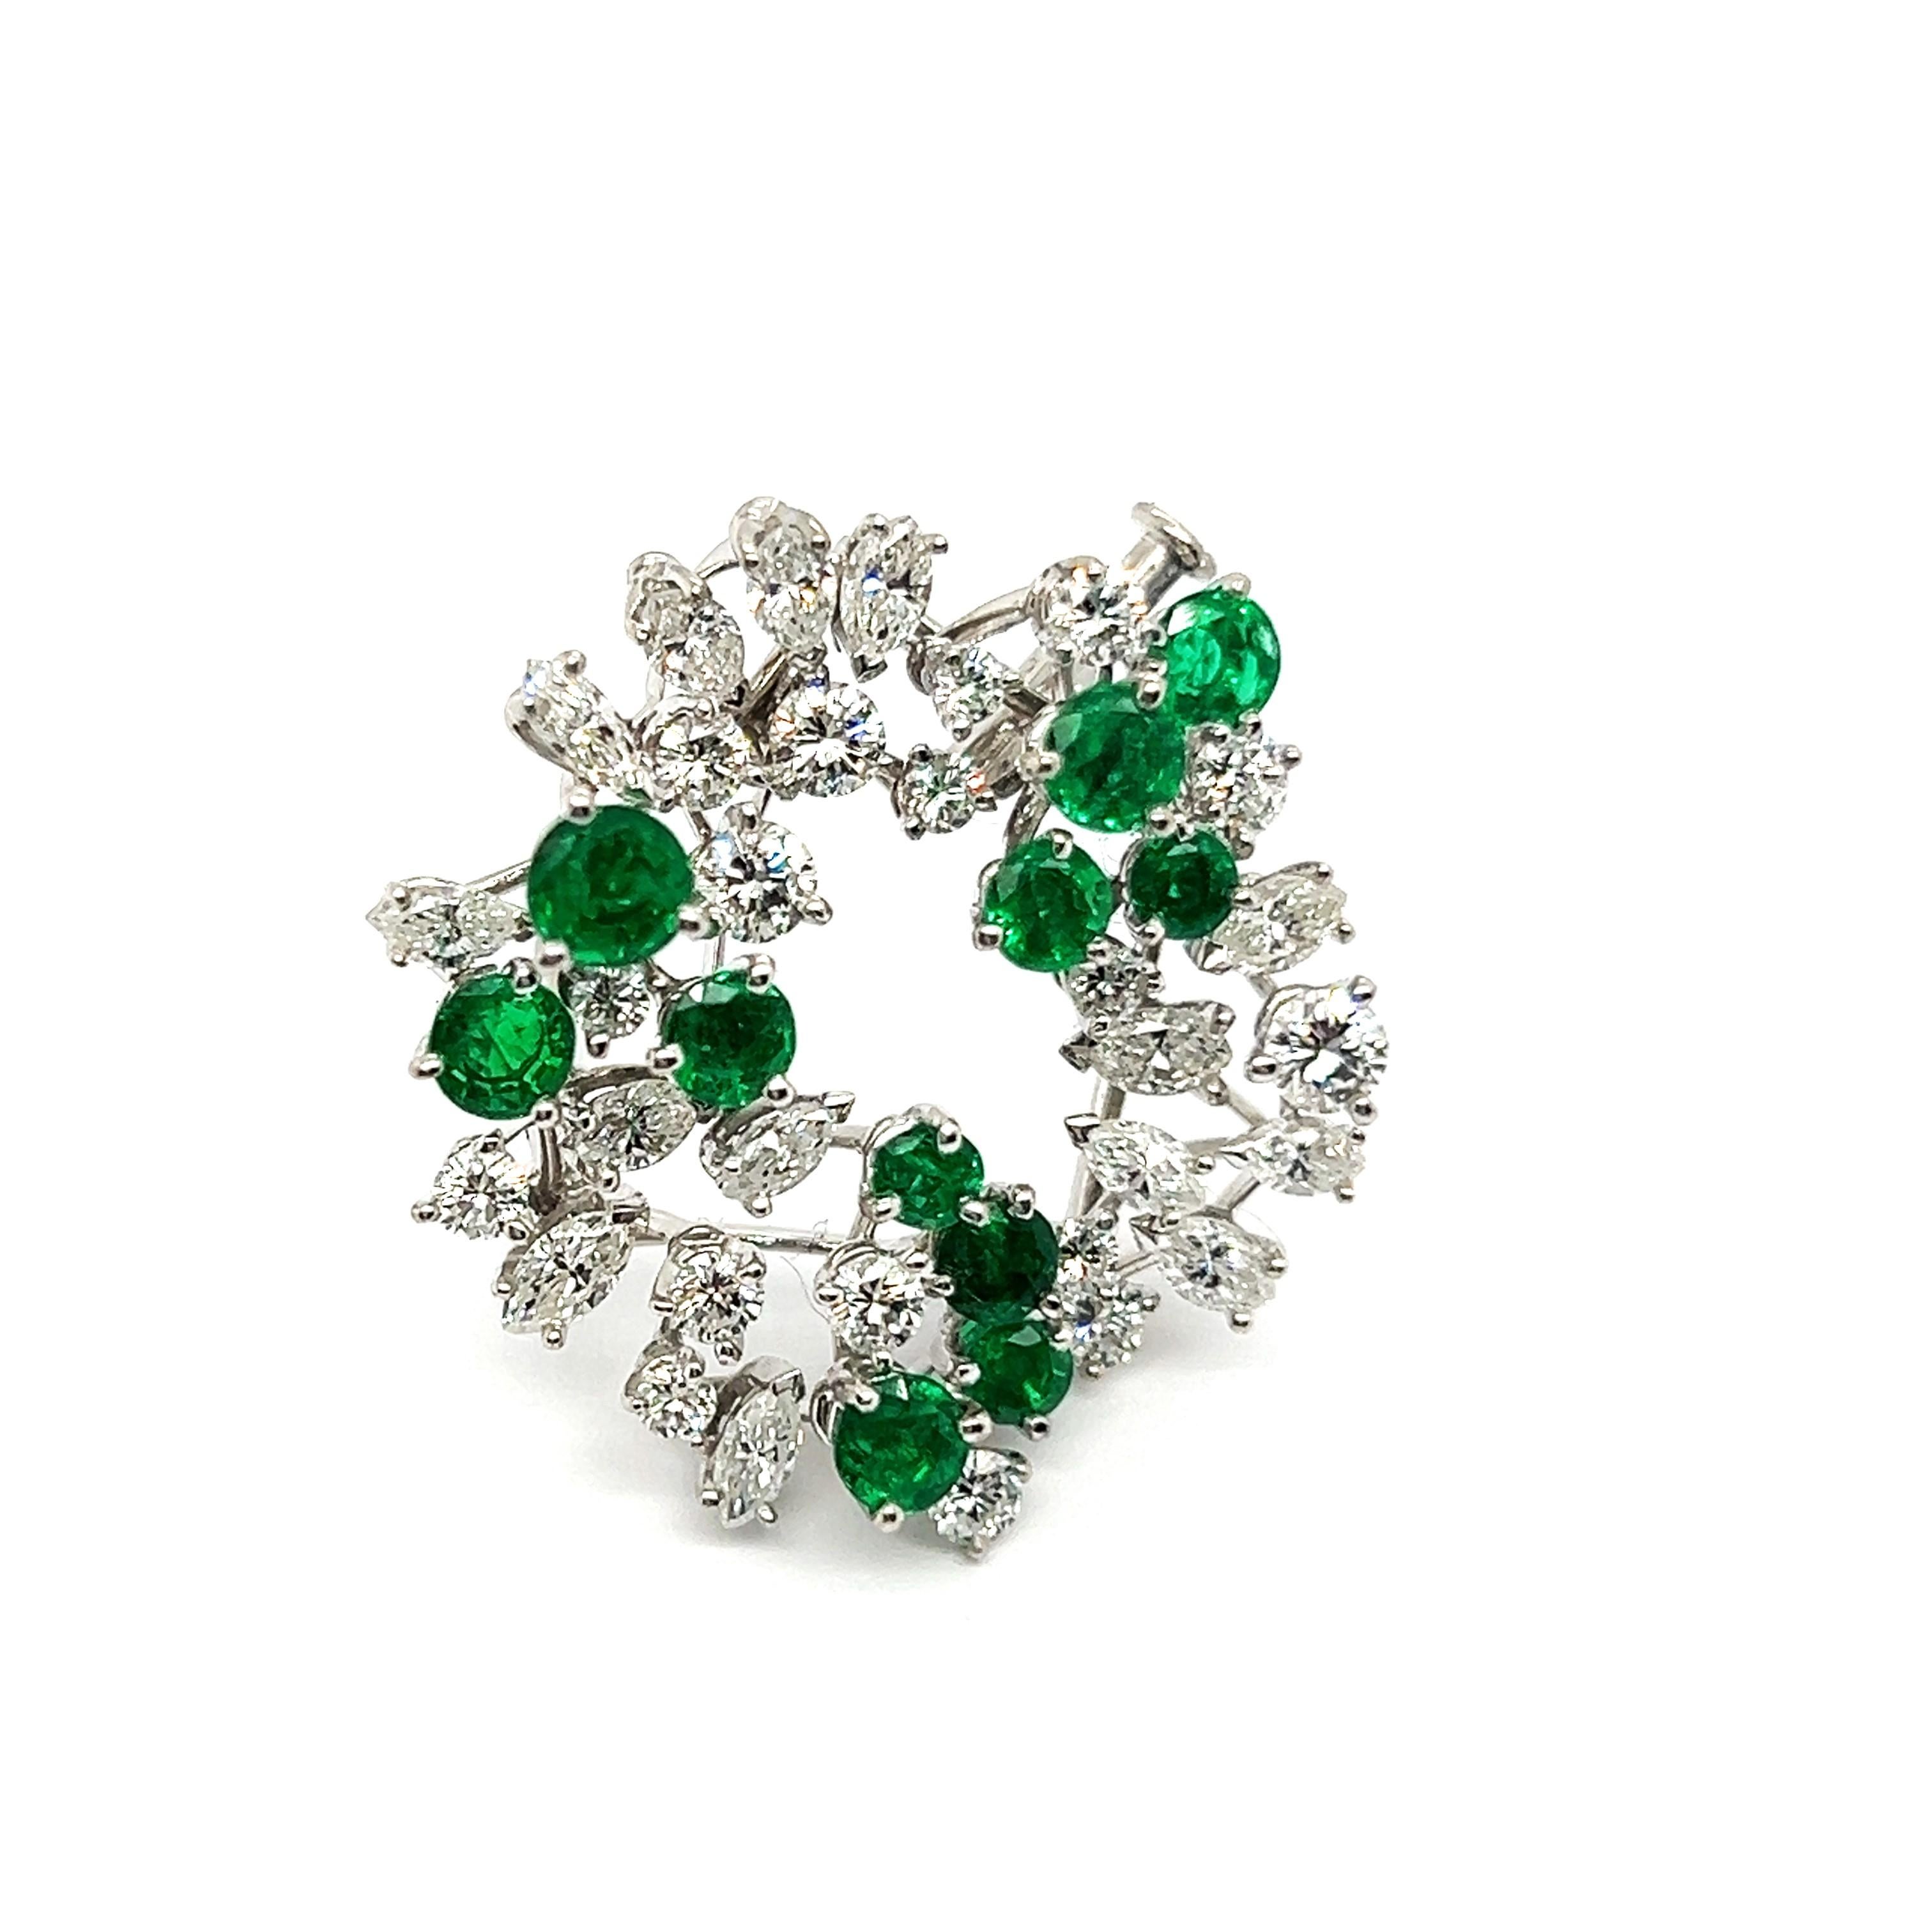 Brooch with Emeralds & Diamonds in 18 Karat White Gold by Meister For Sale 6